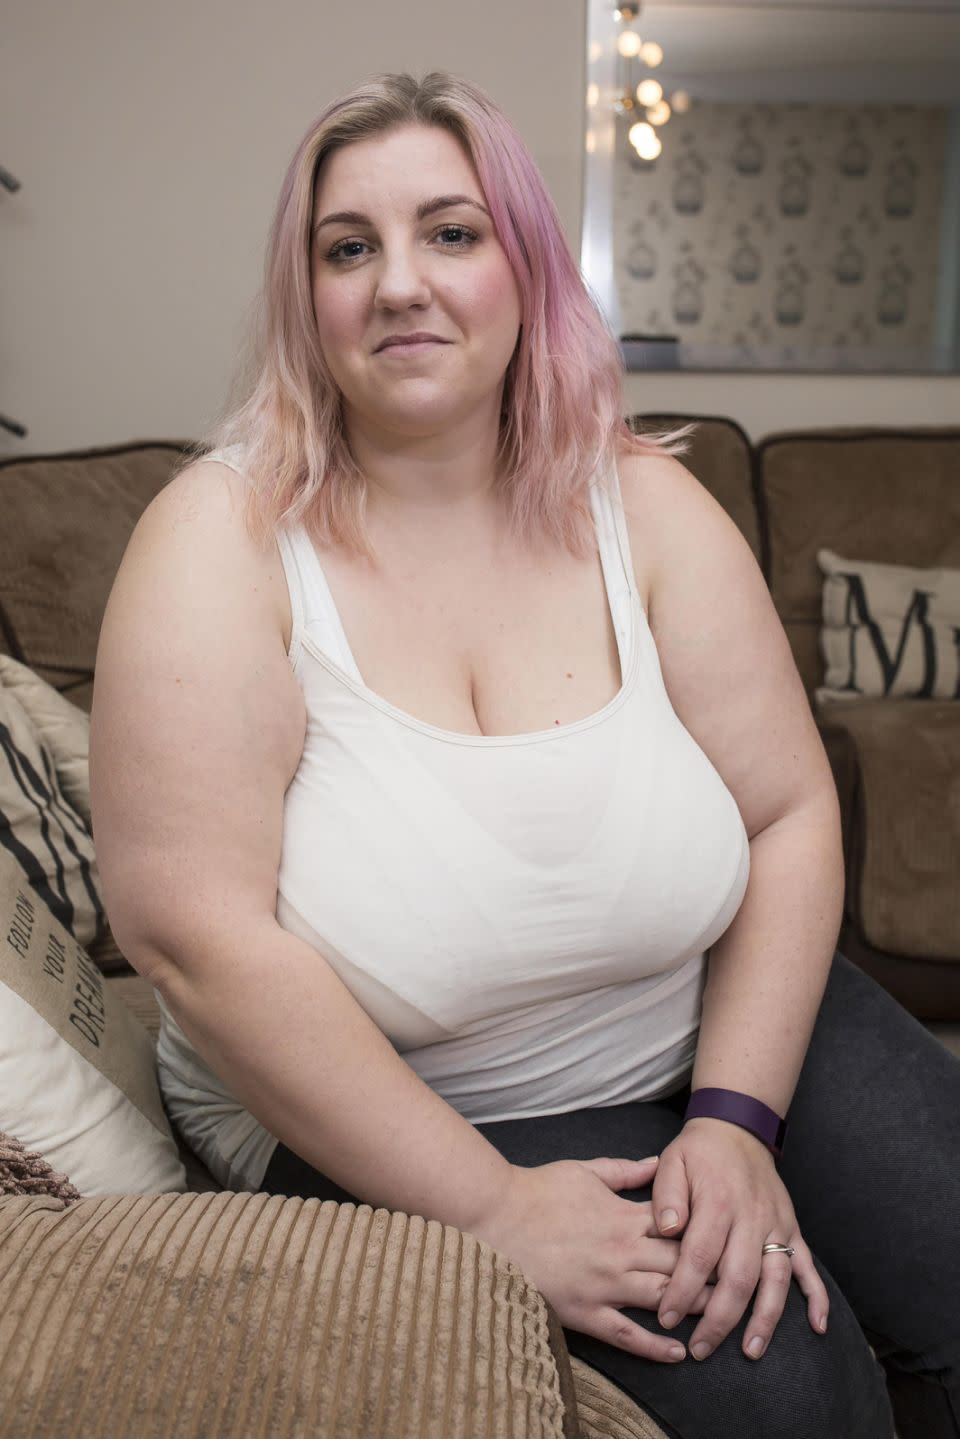 After battling with her bra size all her life, Danielle is desperate to have surgery. Photo: Caters News